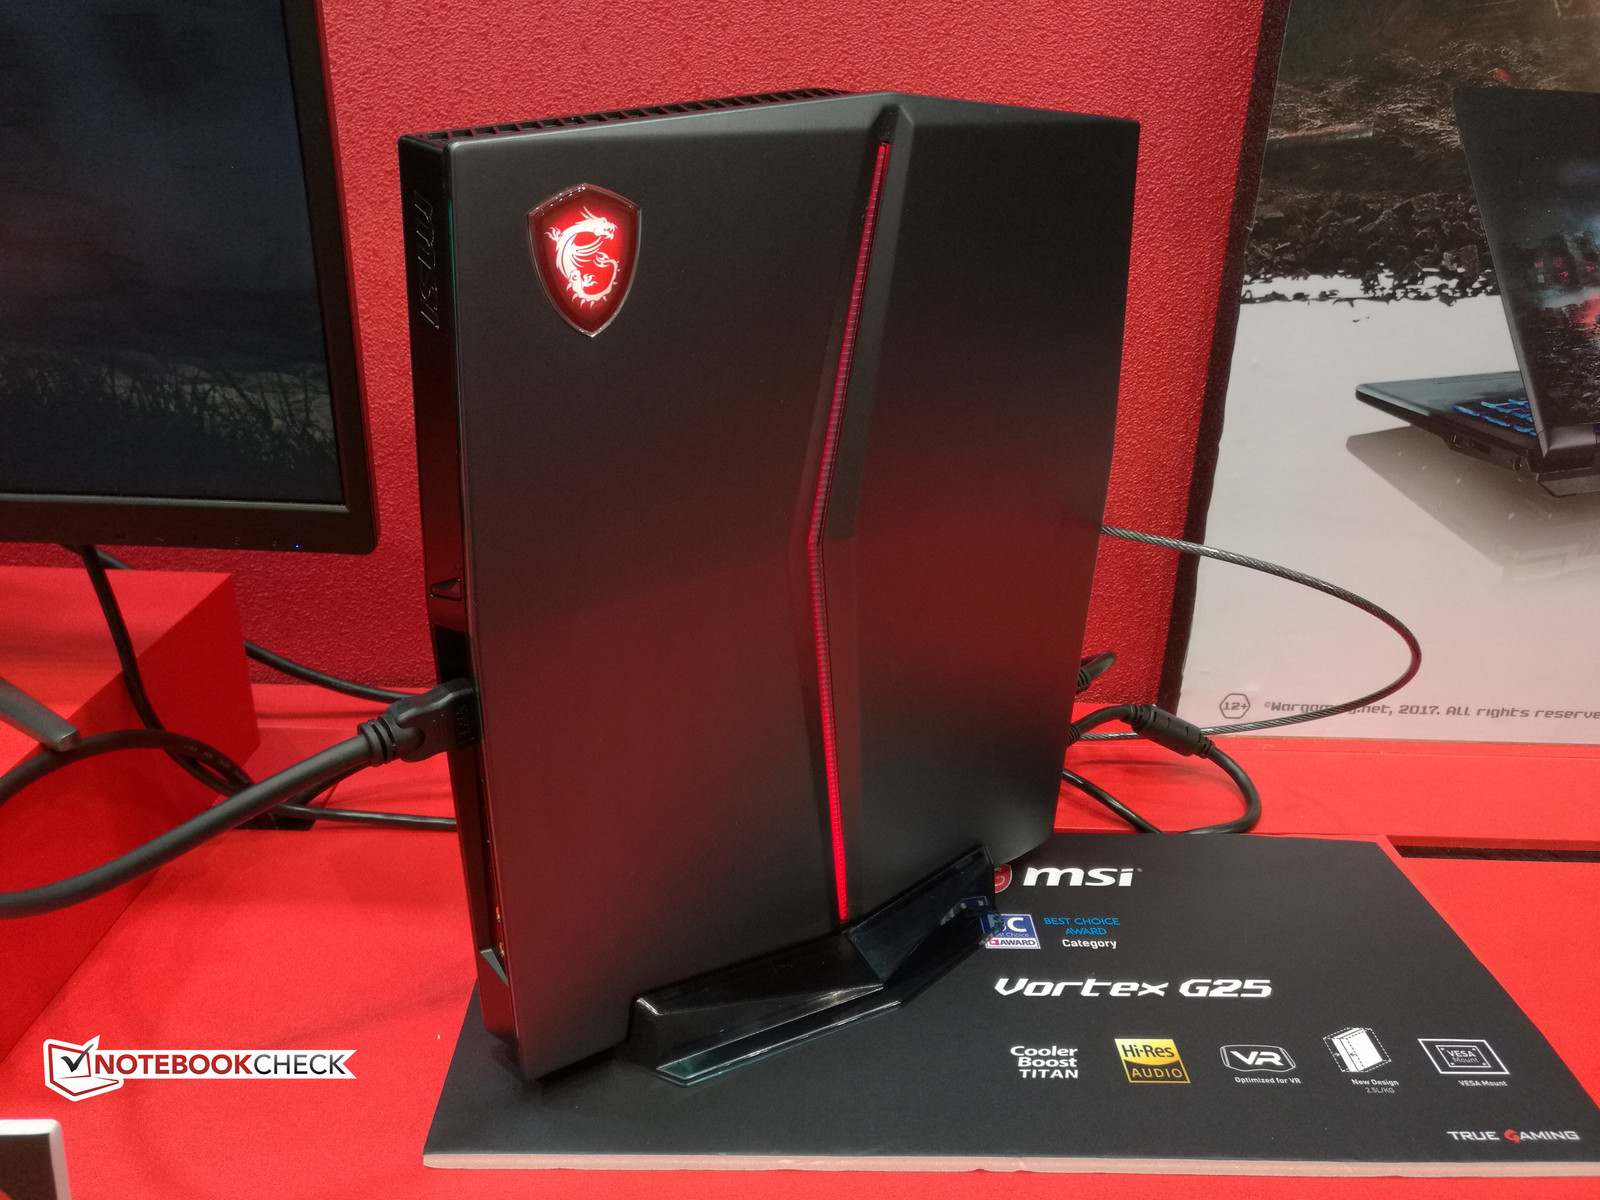 MSI Vortex G25 will be one of the first mini PCs to ship with